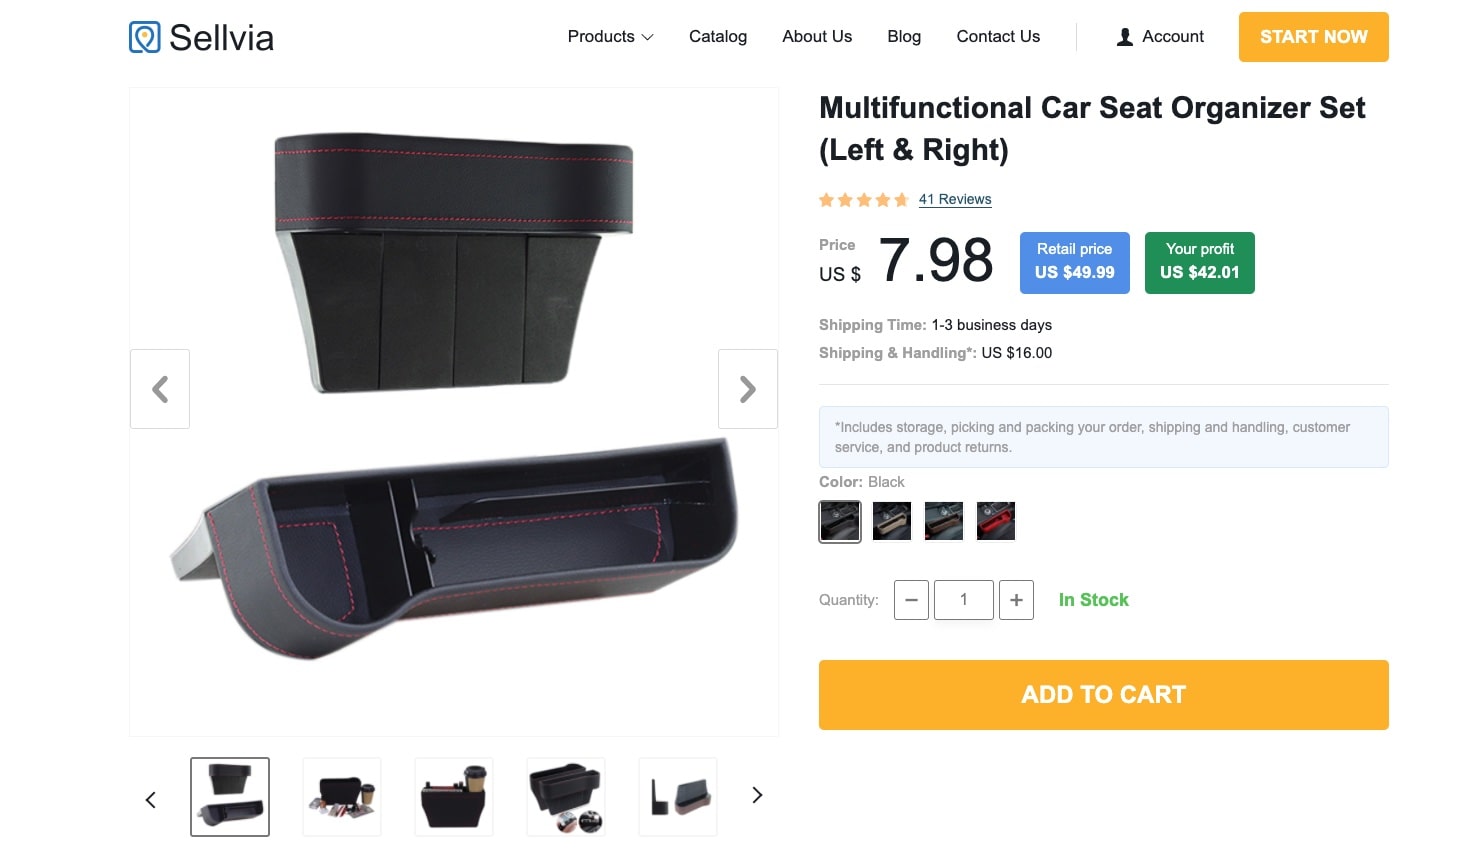 a picture showing a great example of a product from profitable niches with low competition - it's car organizer